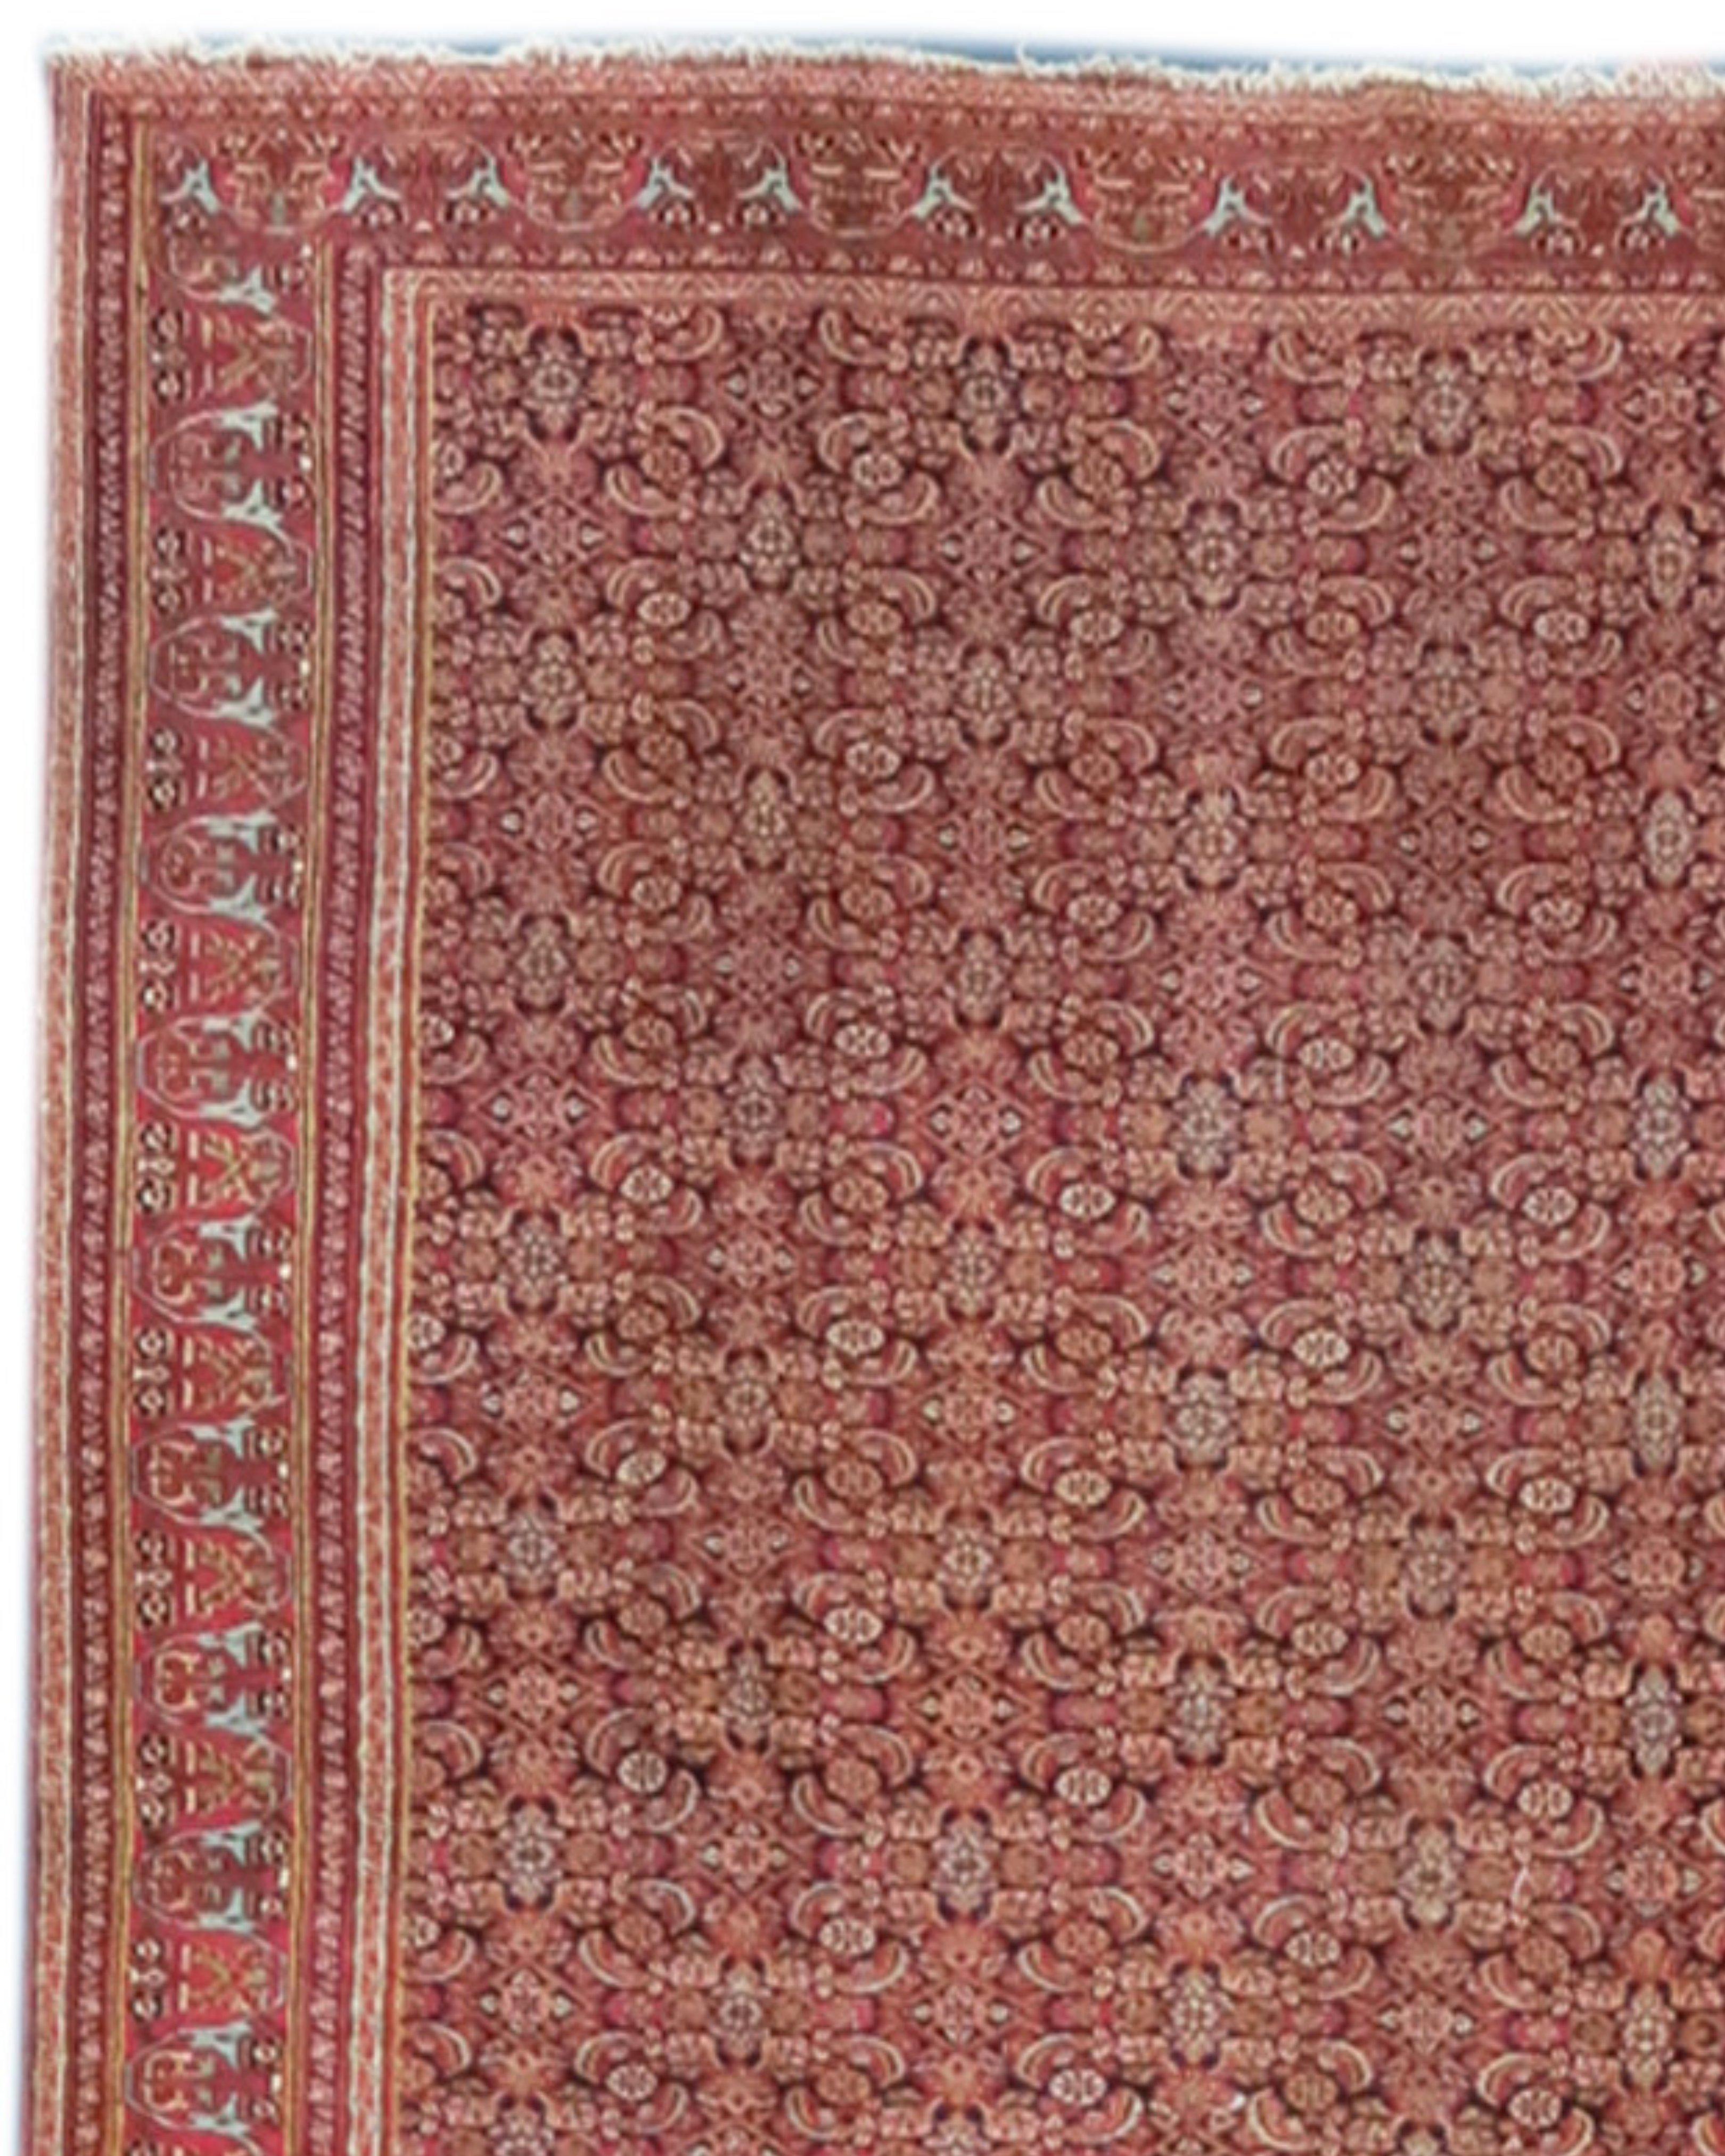 Persian Khorassan Gallery Carpet, Late 19th century For Sale